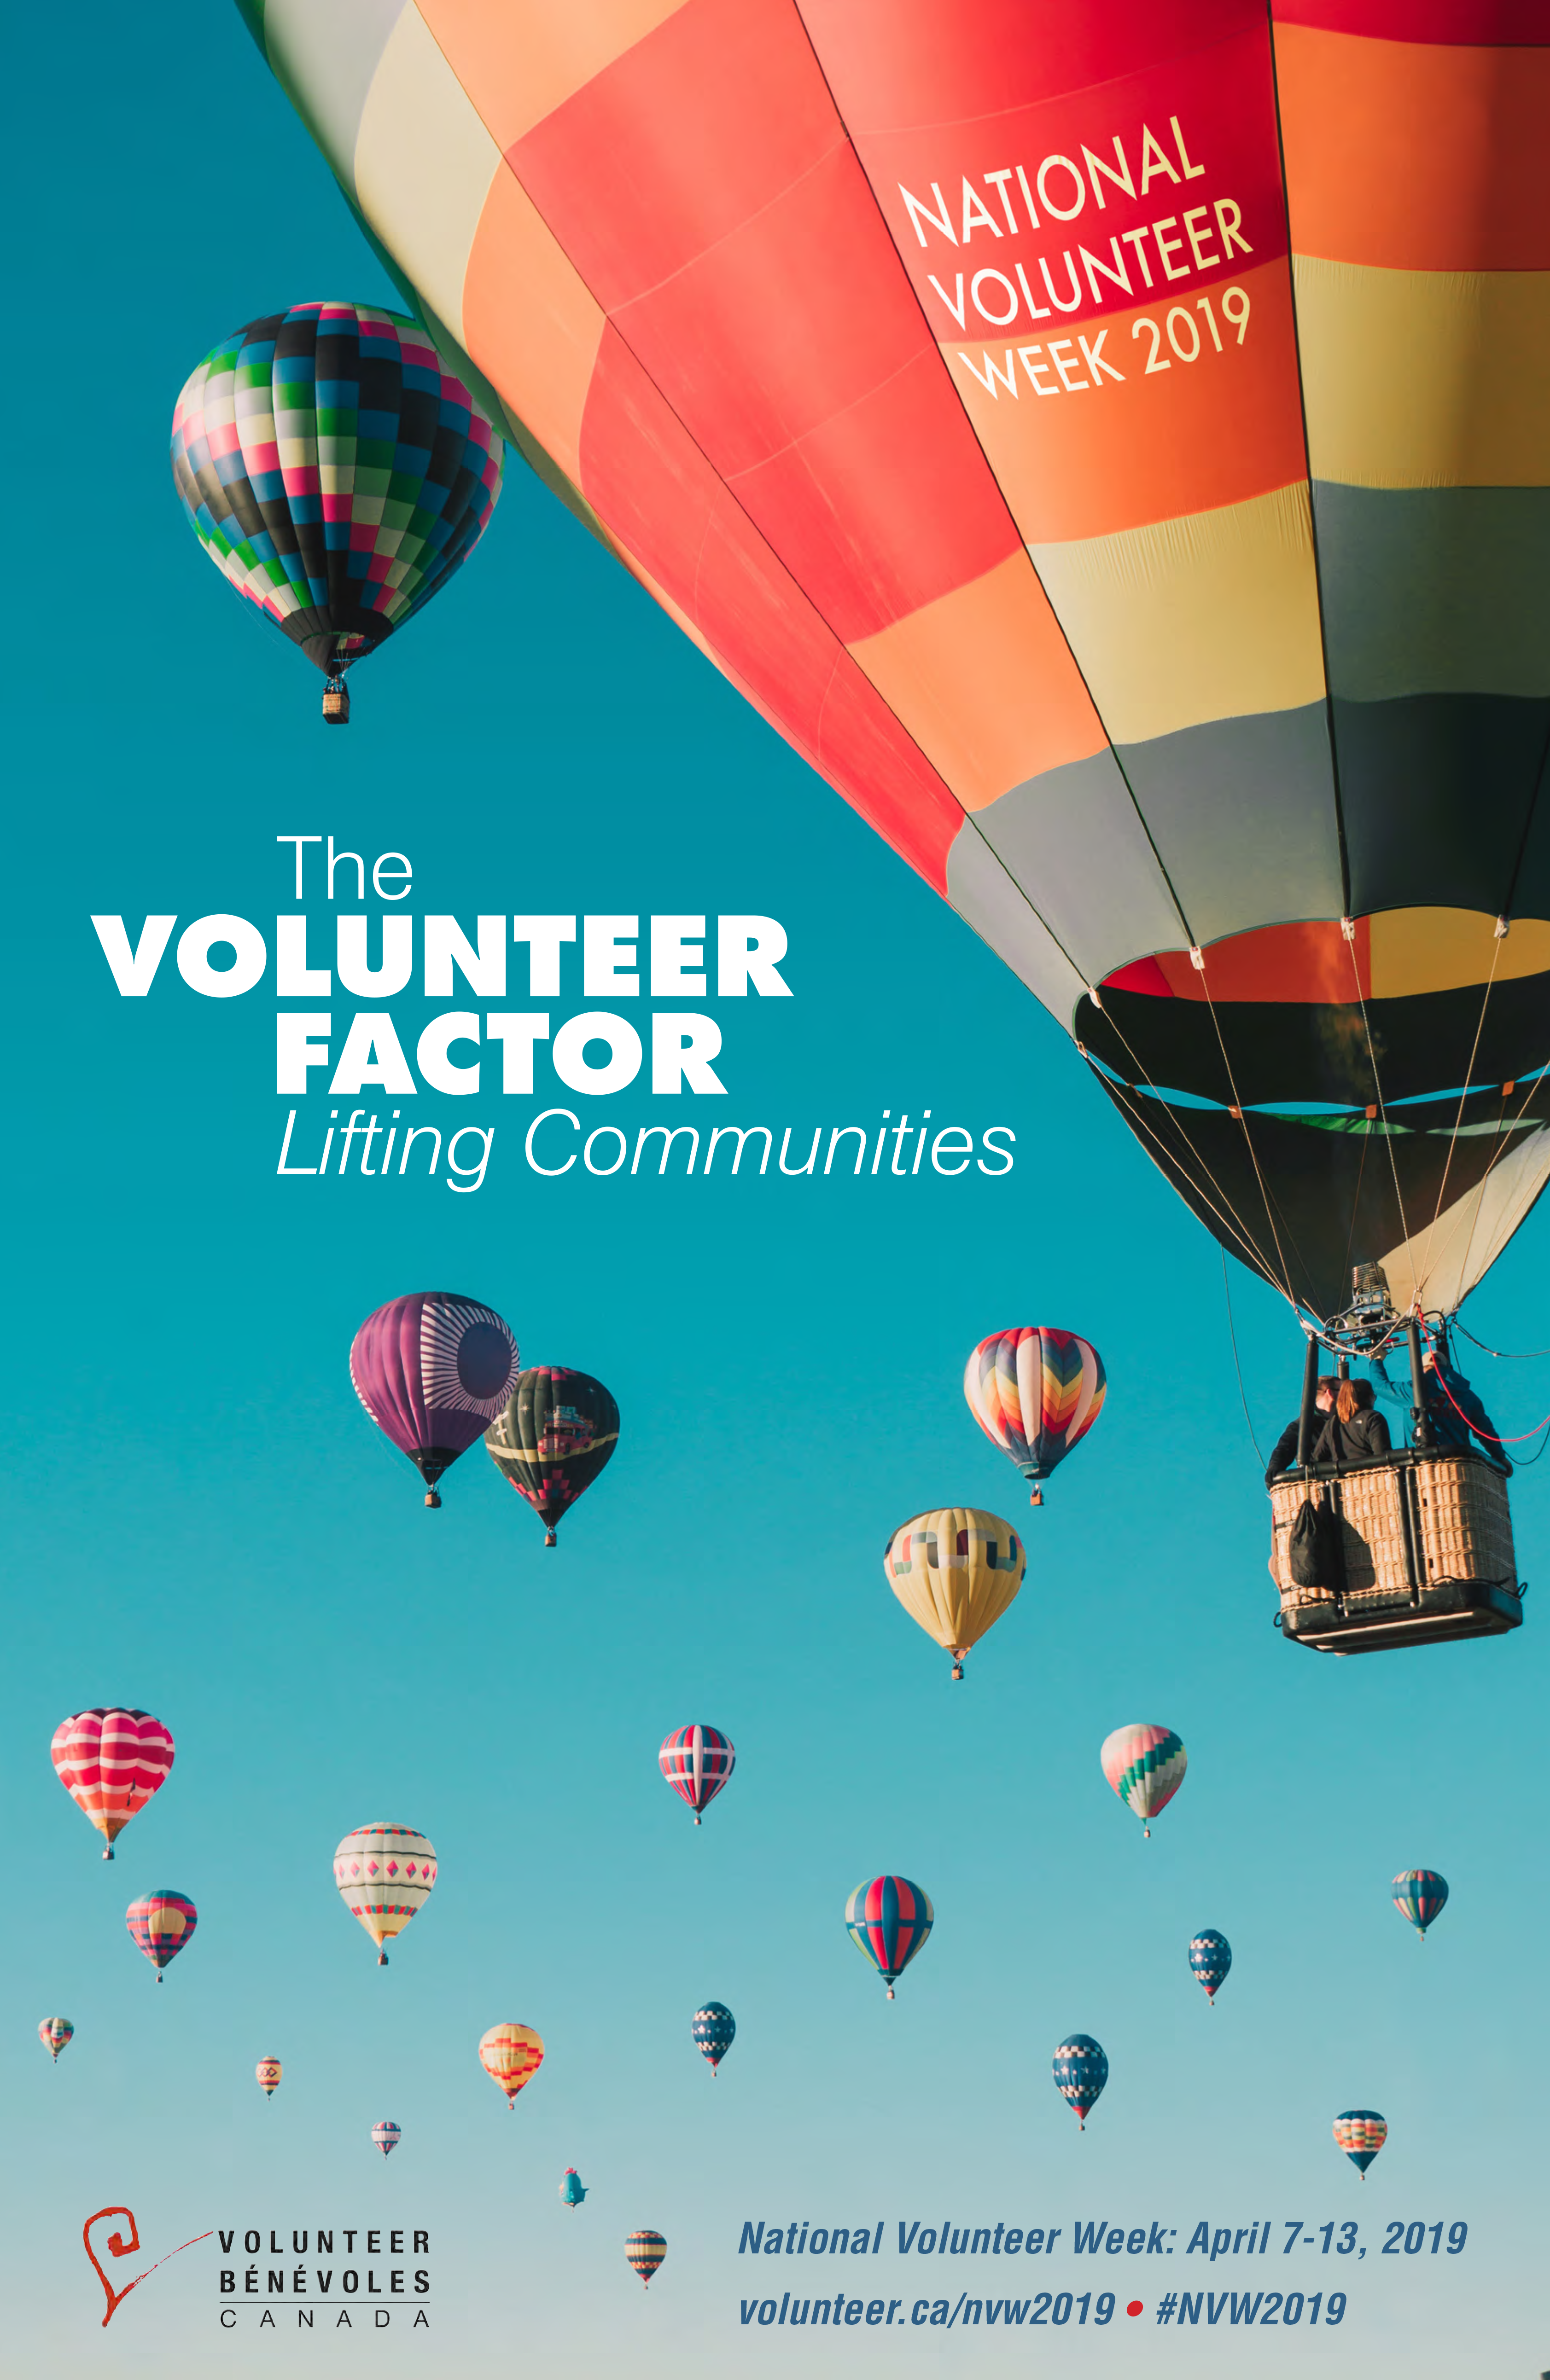 Many hot air balloons in the sky, one large one says "National Volunteer Week 2019", theme in the middle "The Volunteer Factor - Lifting Communities"